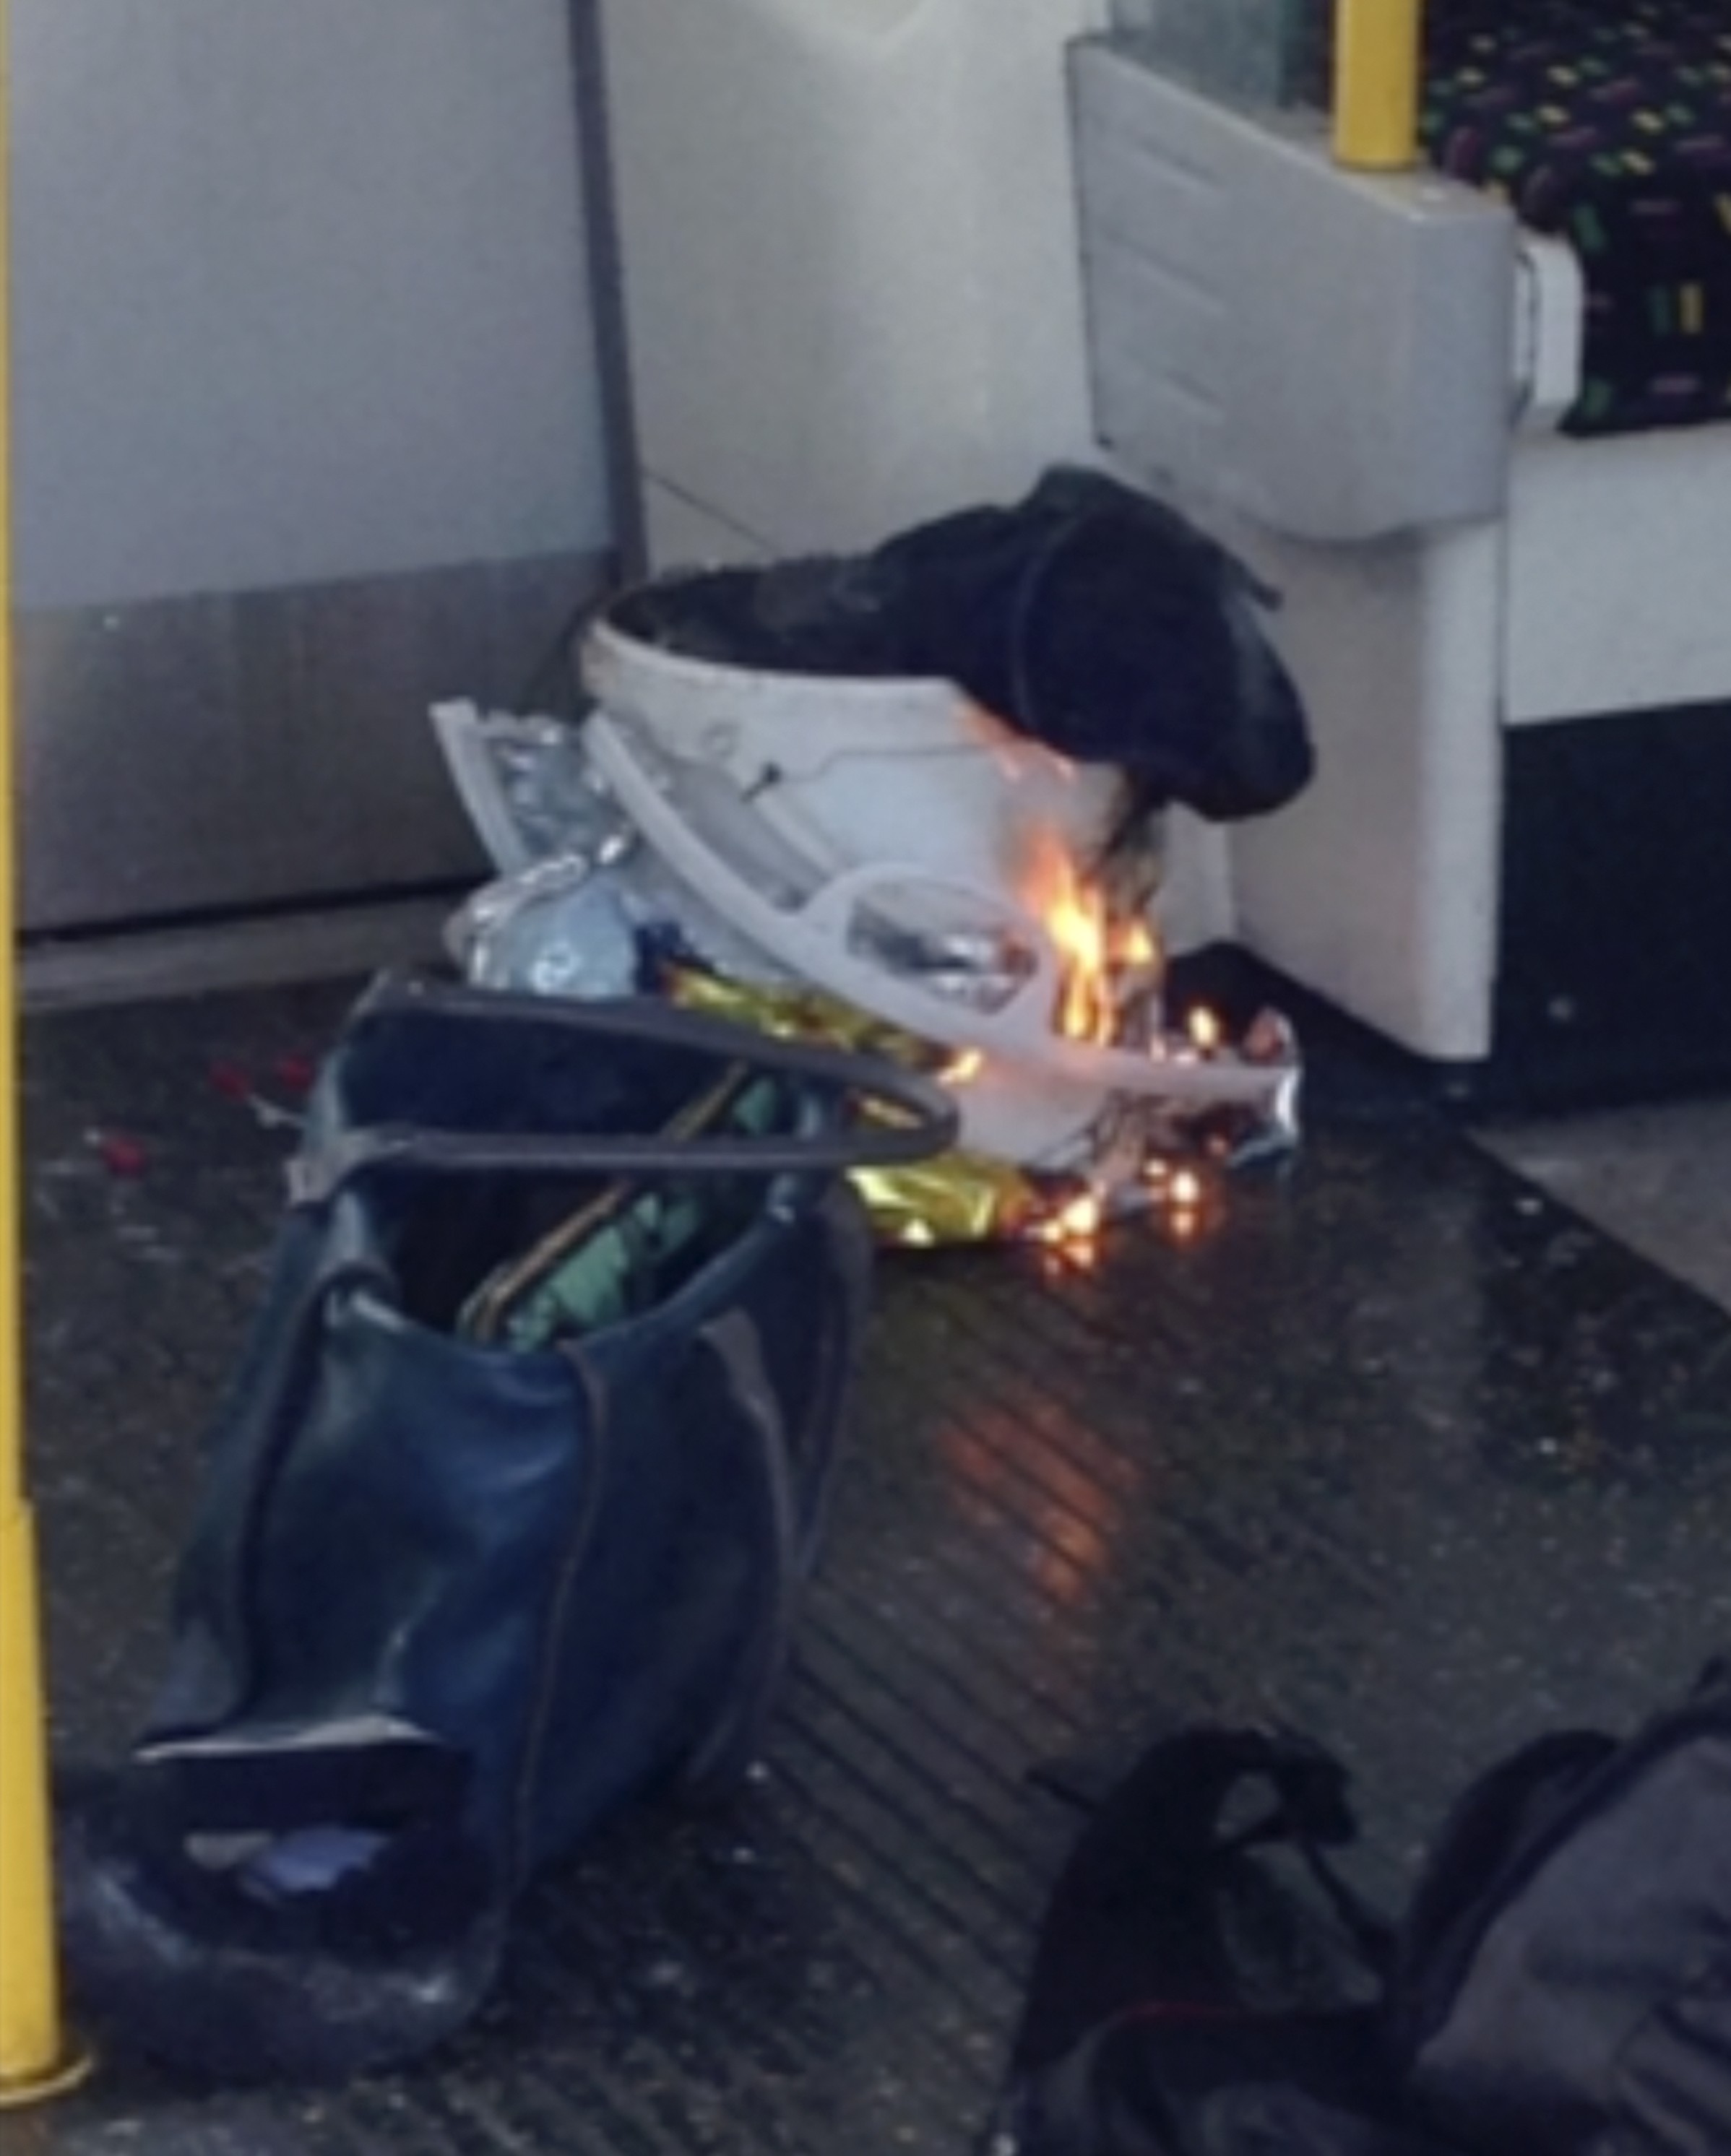 The improvised explosive device that was used in last week’s London train bombing, which left 30 injured. Photo: AP